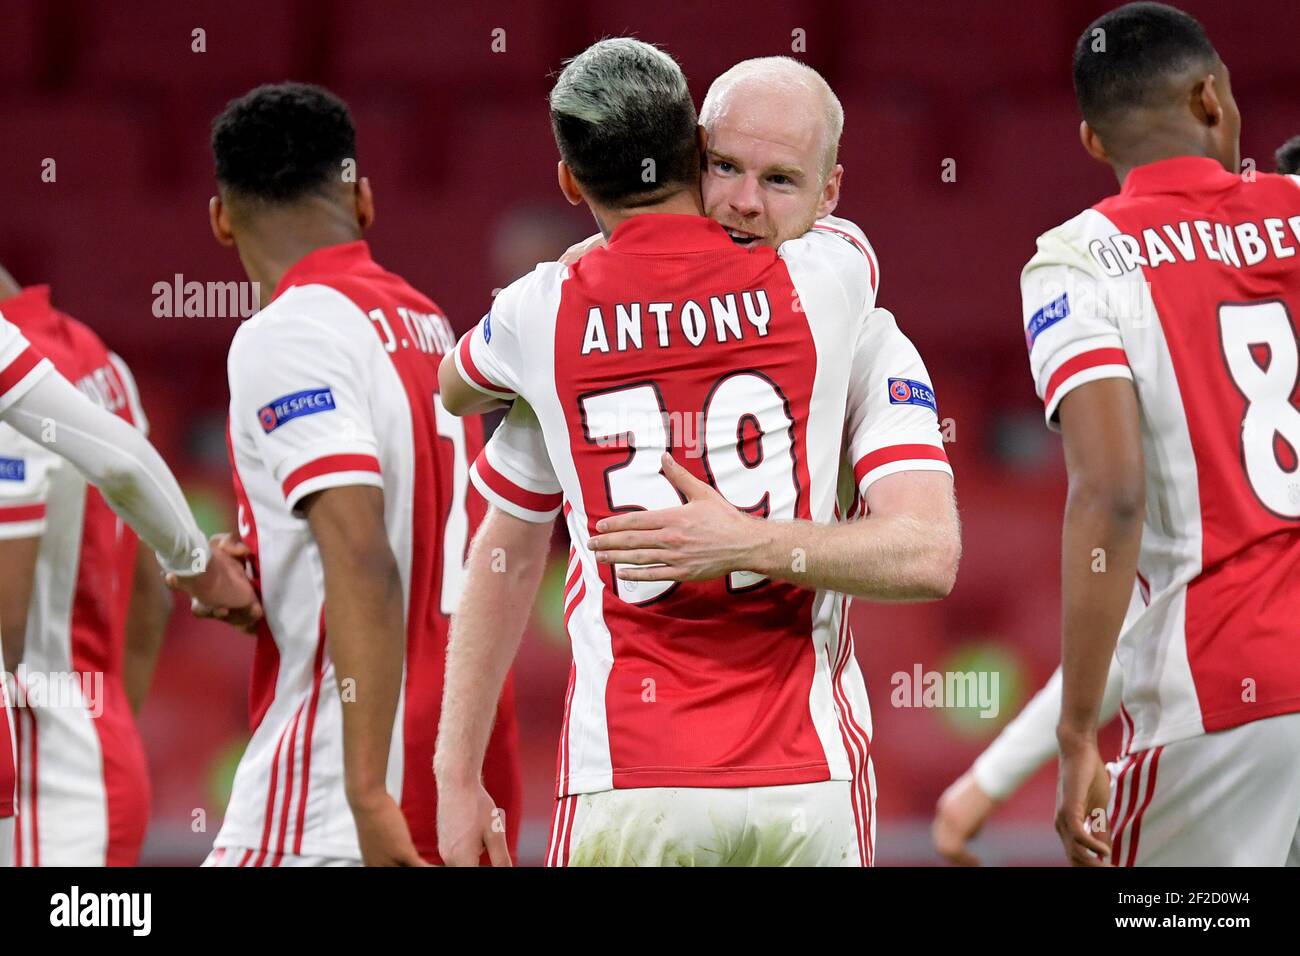 AMSTERDAM , NETHERLANDS - MARCH 11: celebrate Antony of Ajax, Davy Klaassen of Ajax during the Ajax v BSC Young Boys - UEFA Europa League Round Of 16 Stock Photo